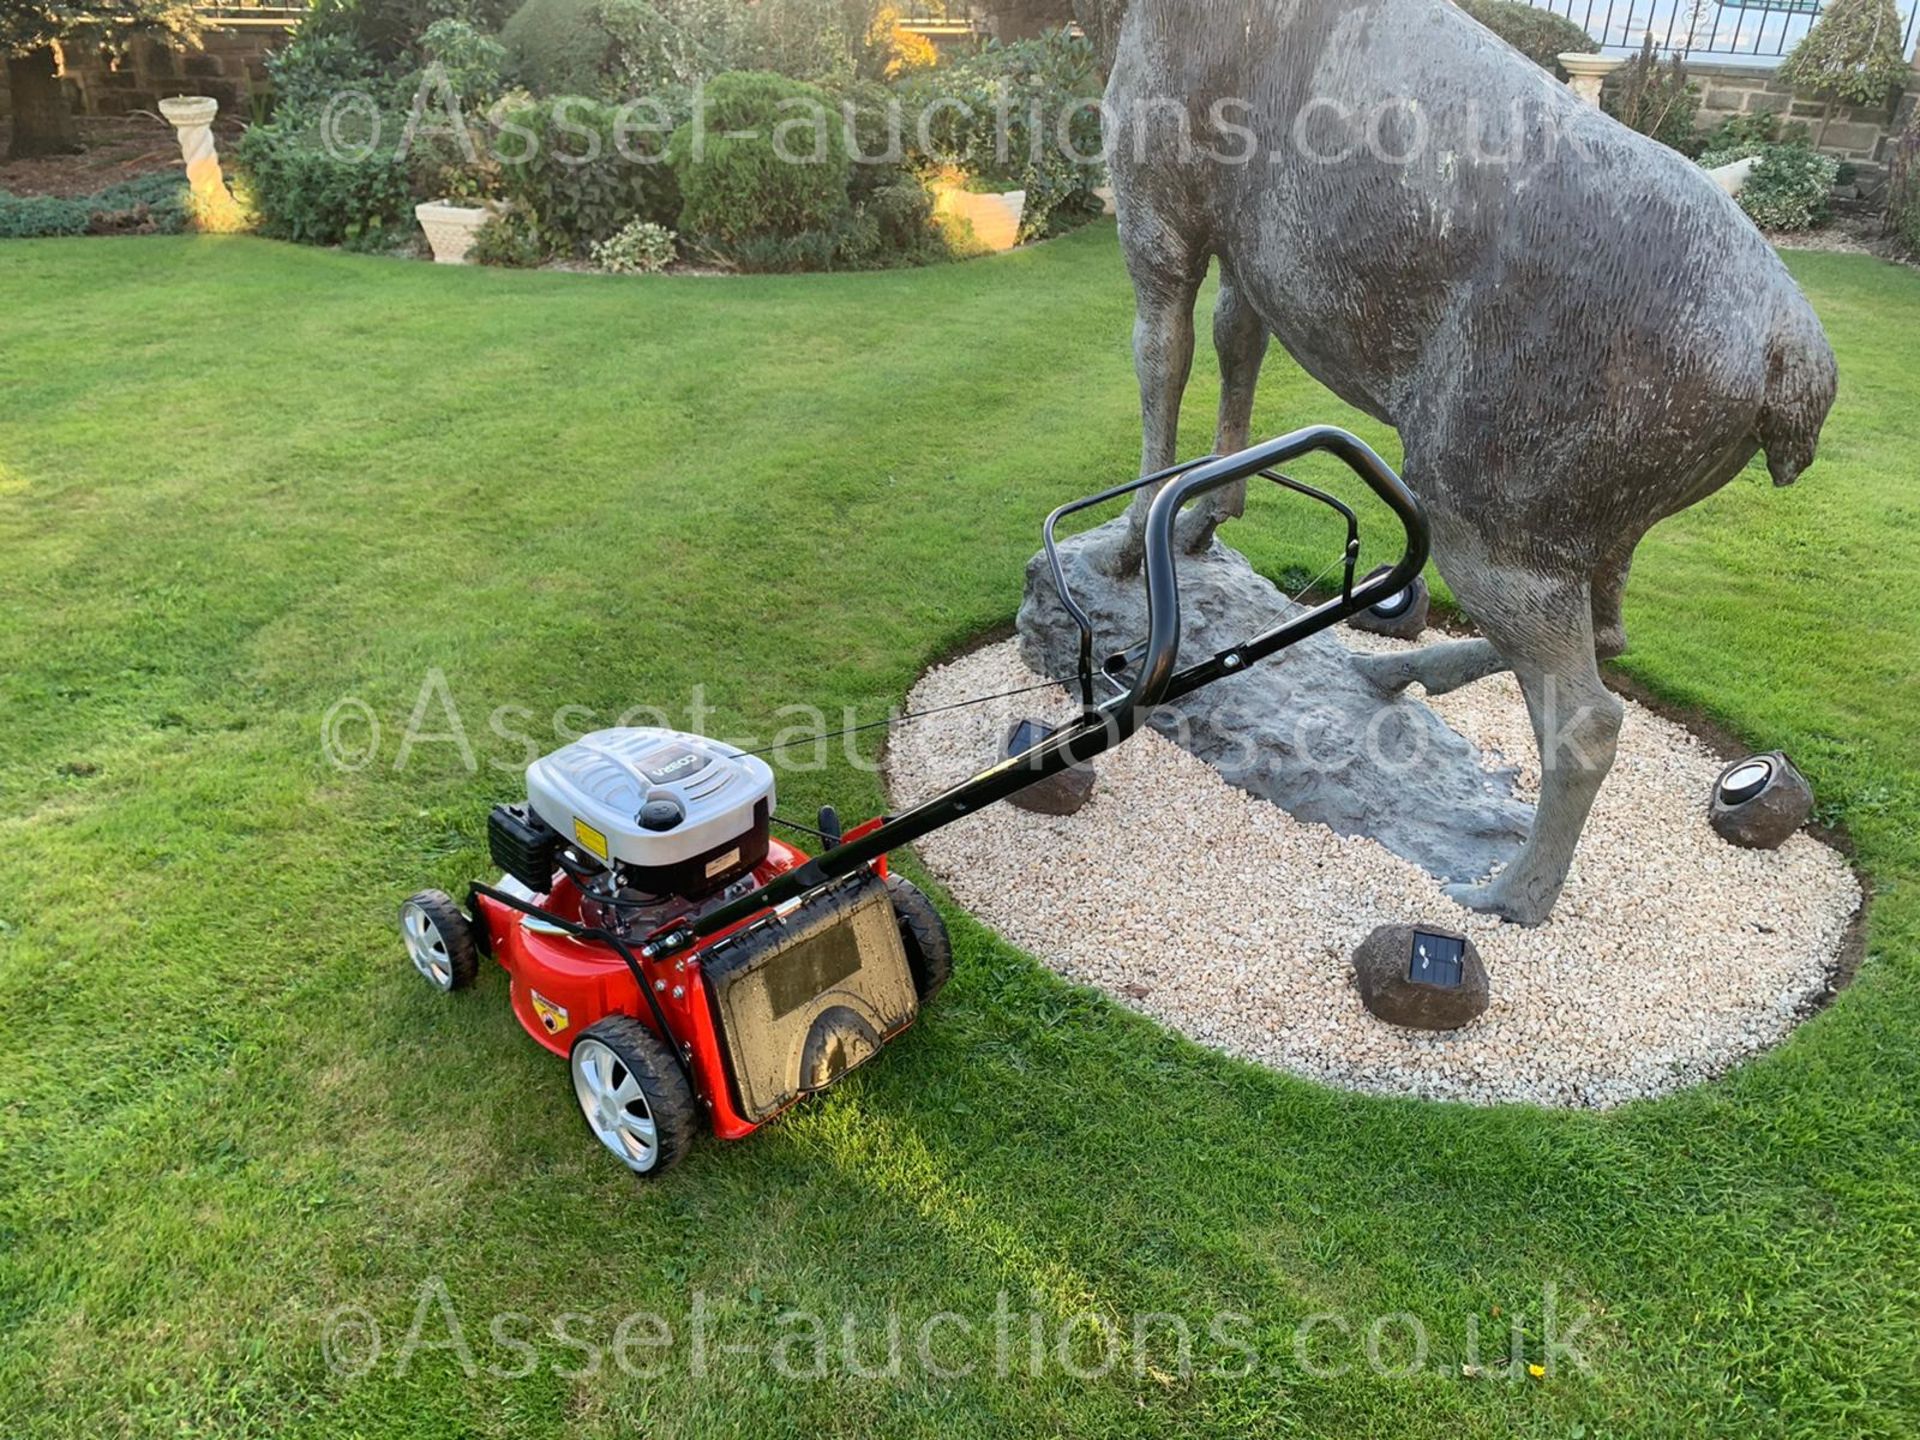 2016 COBRA M40C LAWN MOWER, RUNS AND WORKS WELL, ONLY USED A FEW TIMES, PULL START *NO VAT* - Image 7 of 18